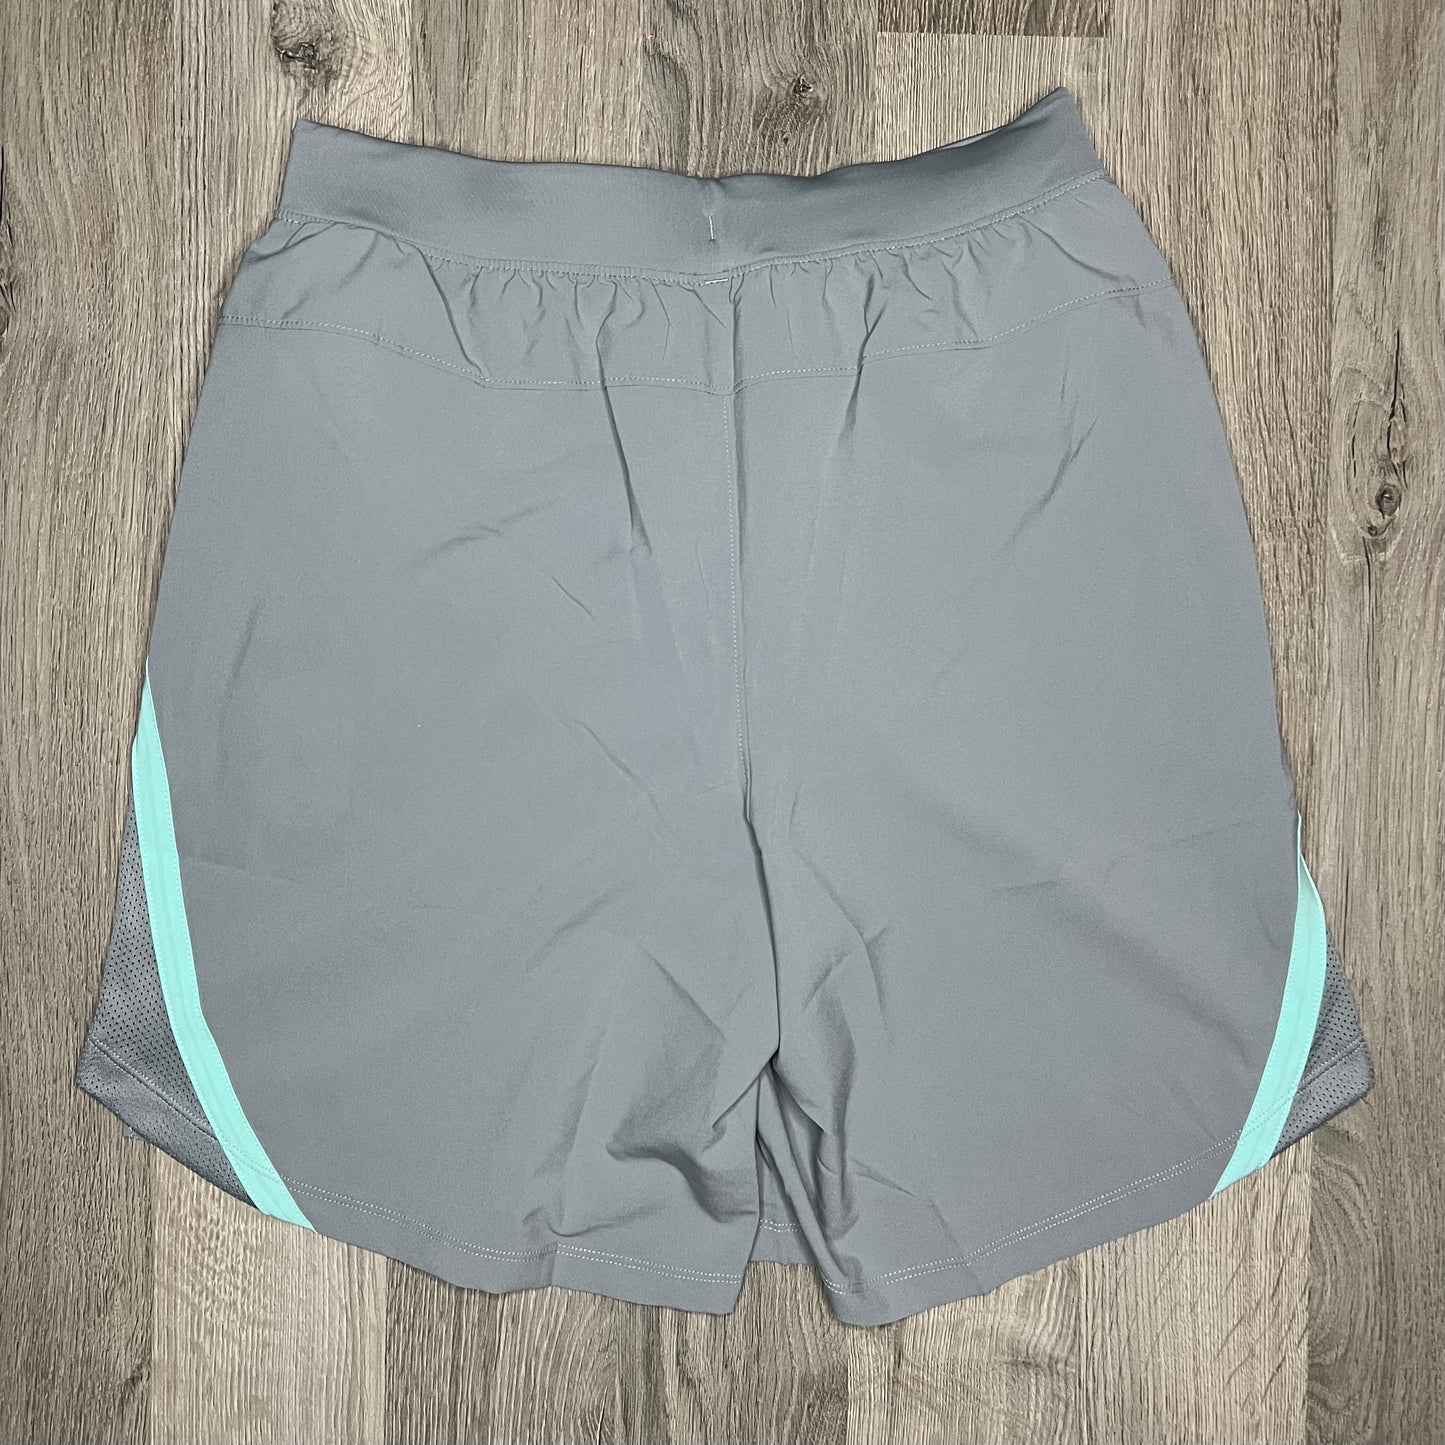 Under Armour Launch Shorts - Grey / Turquoise